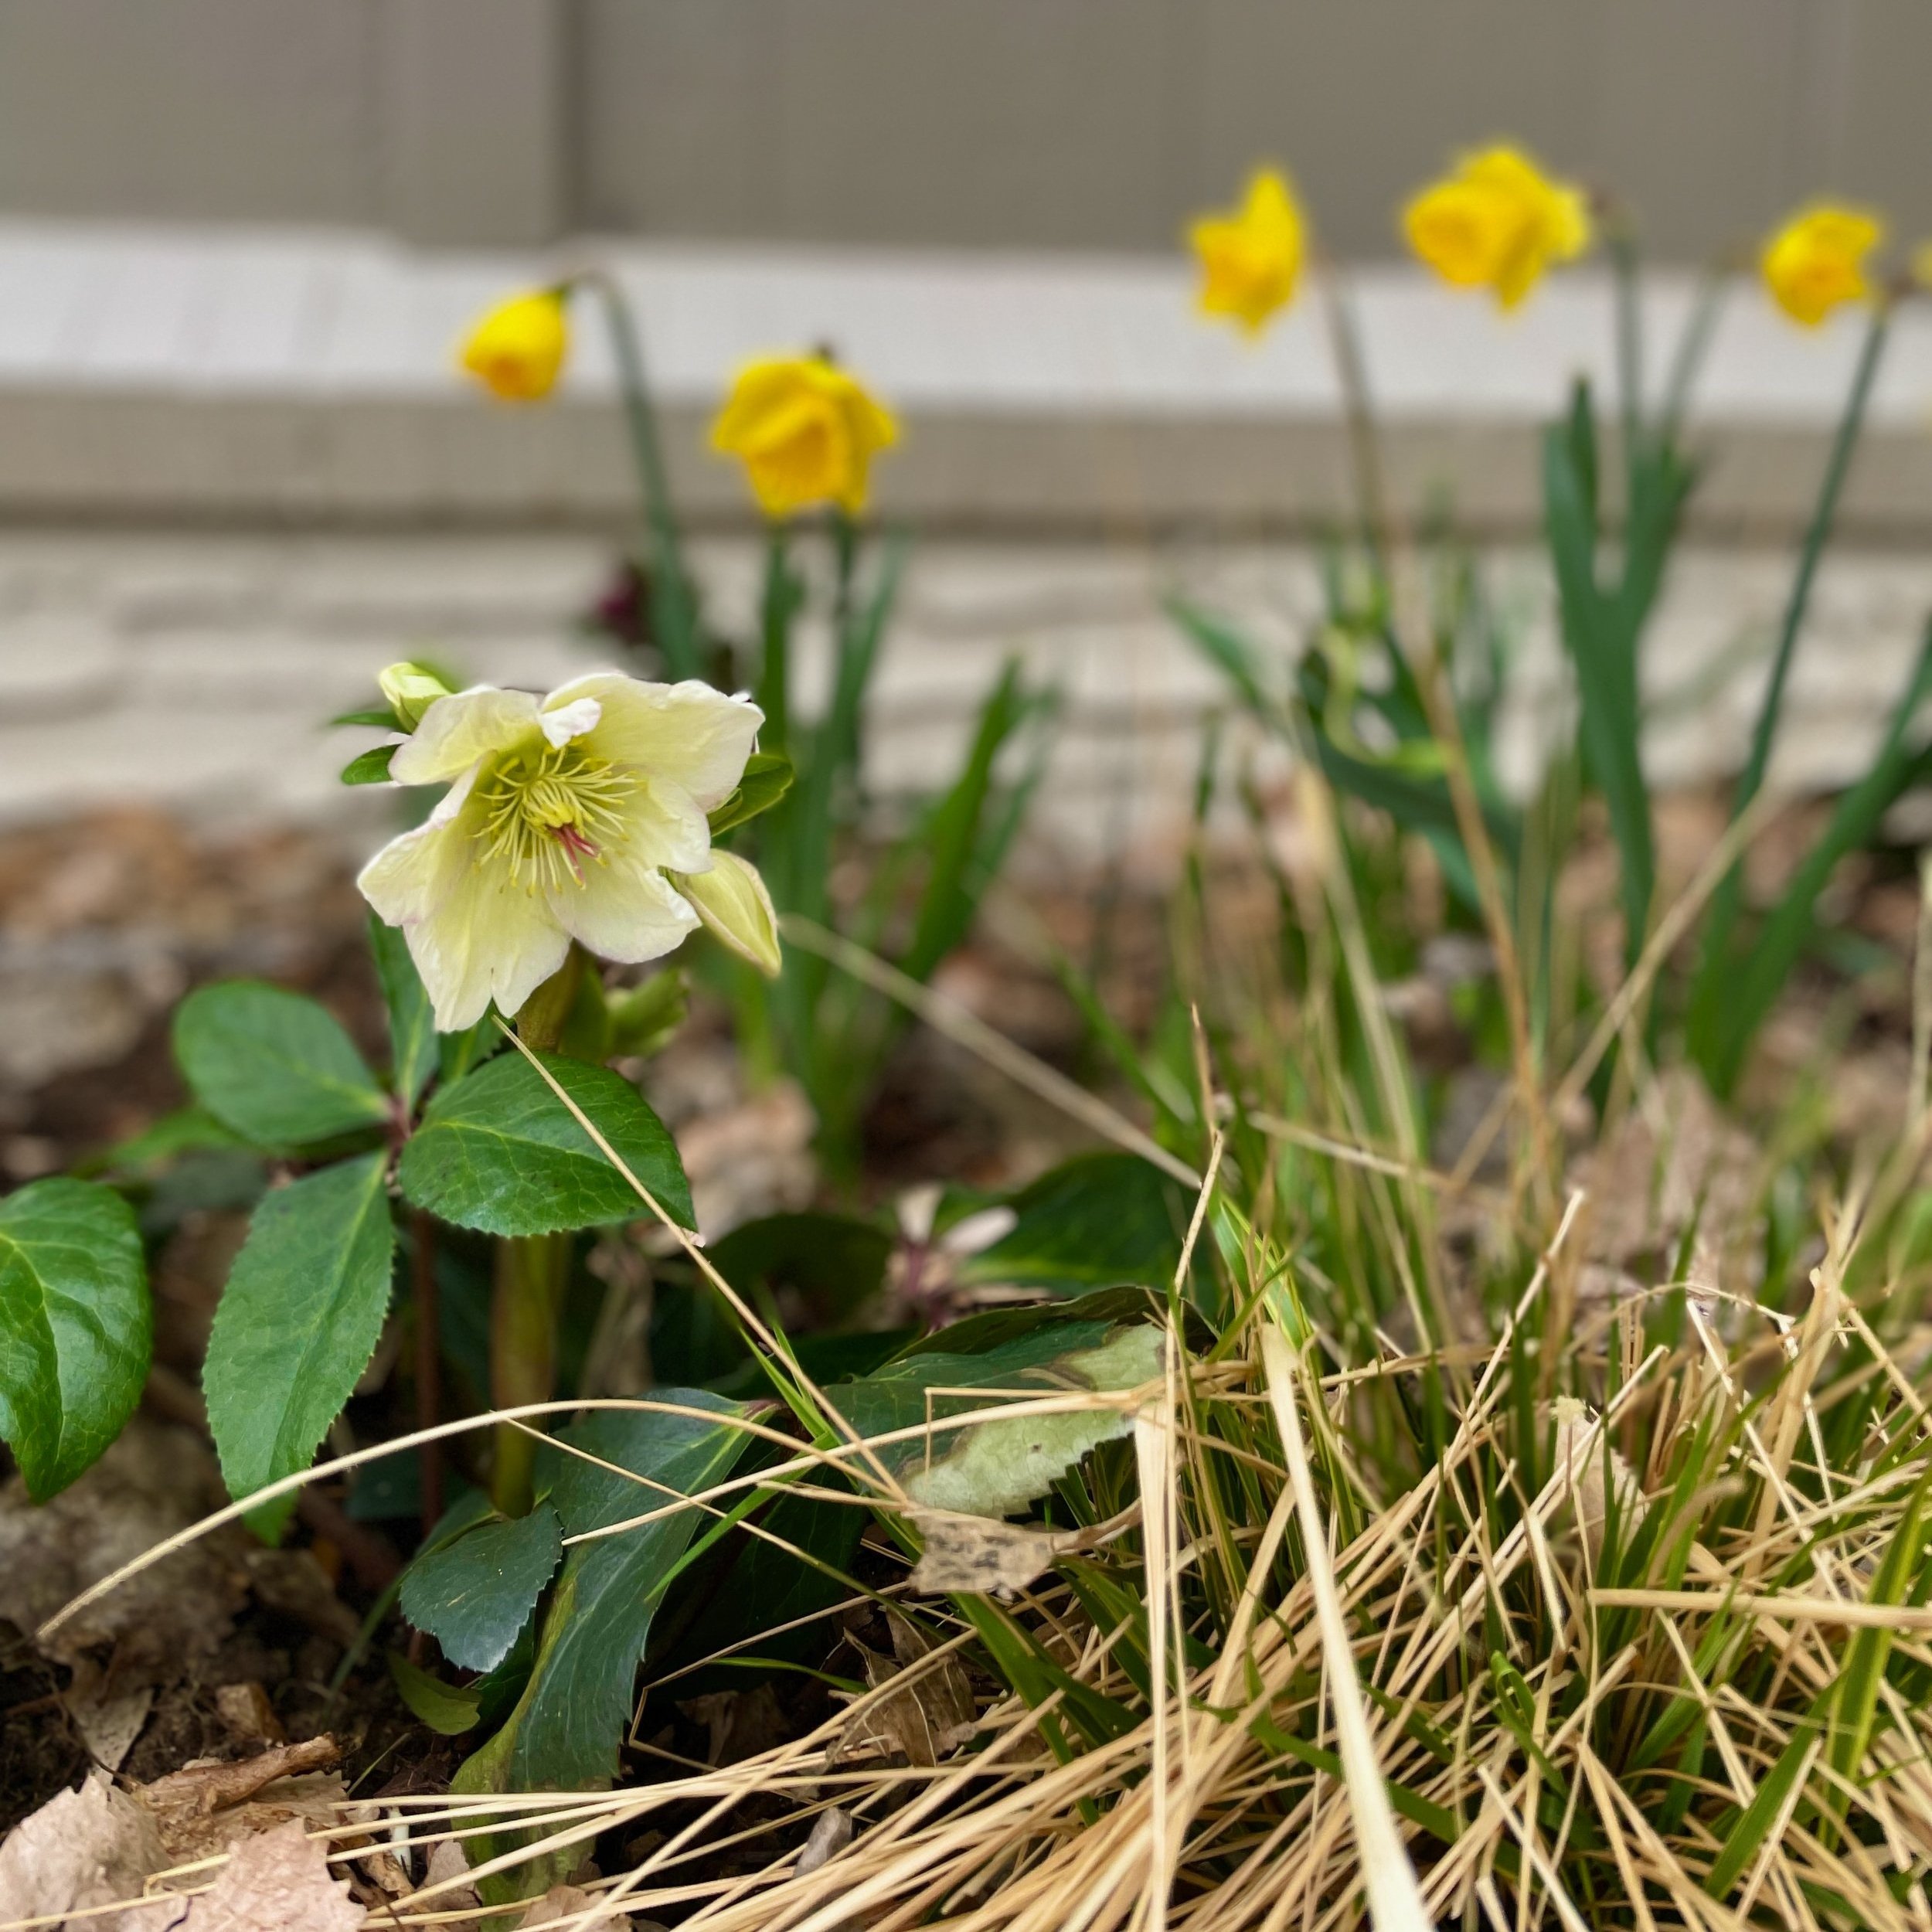 Hellebore and daffodils